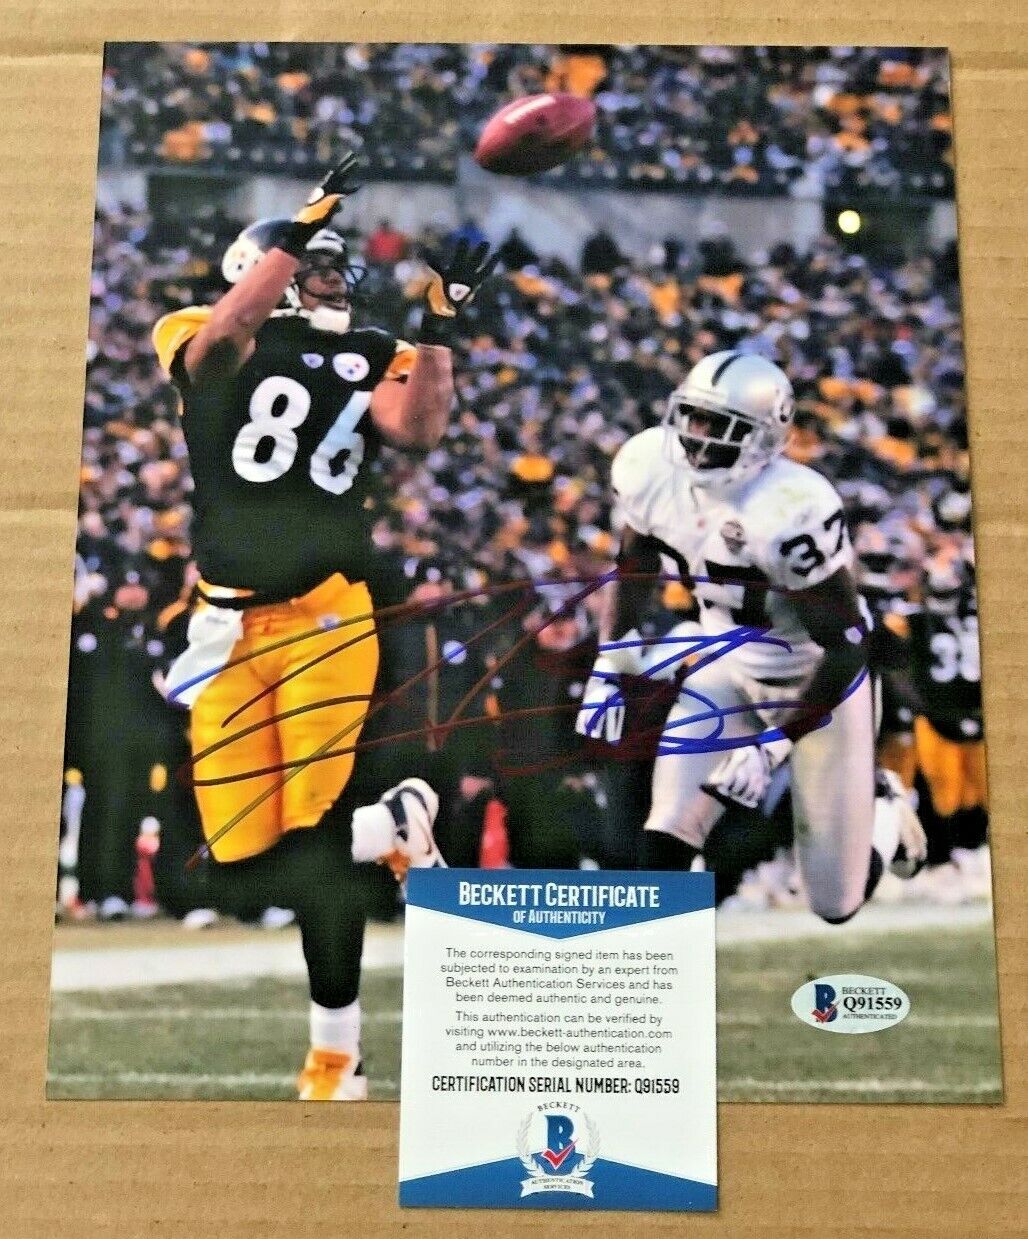 HINES WARD SIGNED 8X10 PITTSBURGH STEELERS Photo Poster painting BECKETT CERTIFIED